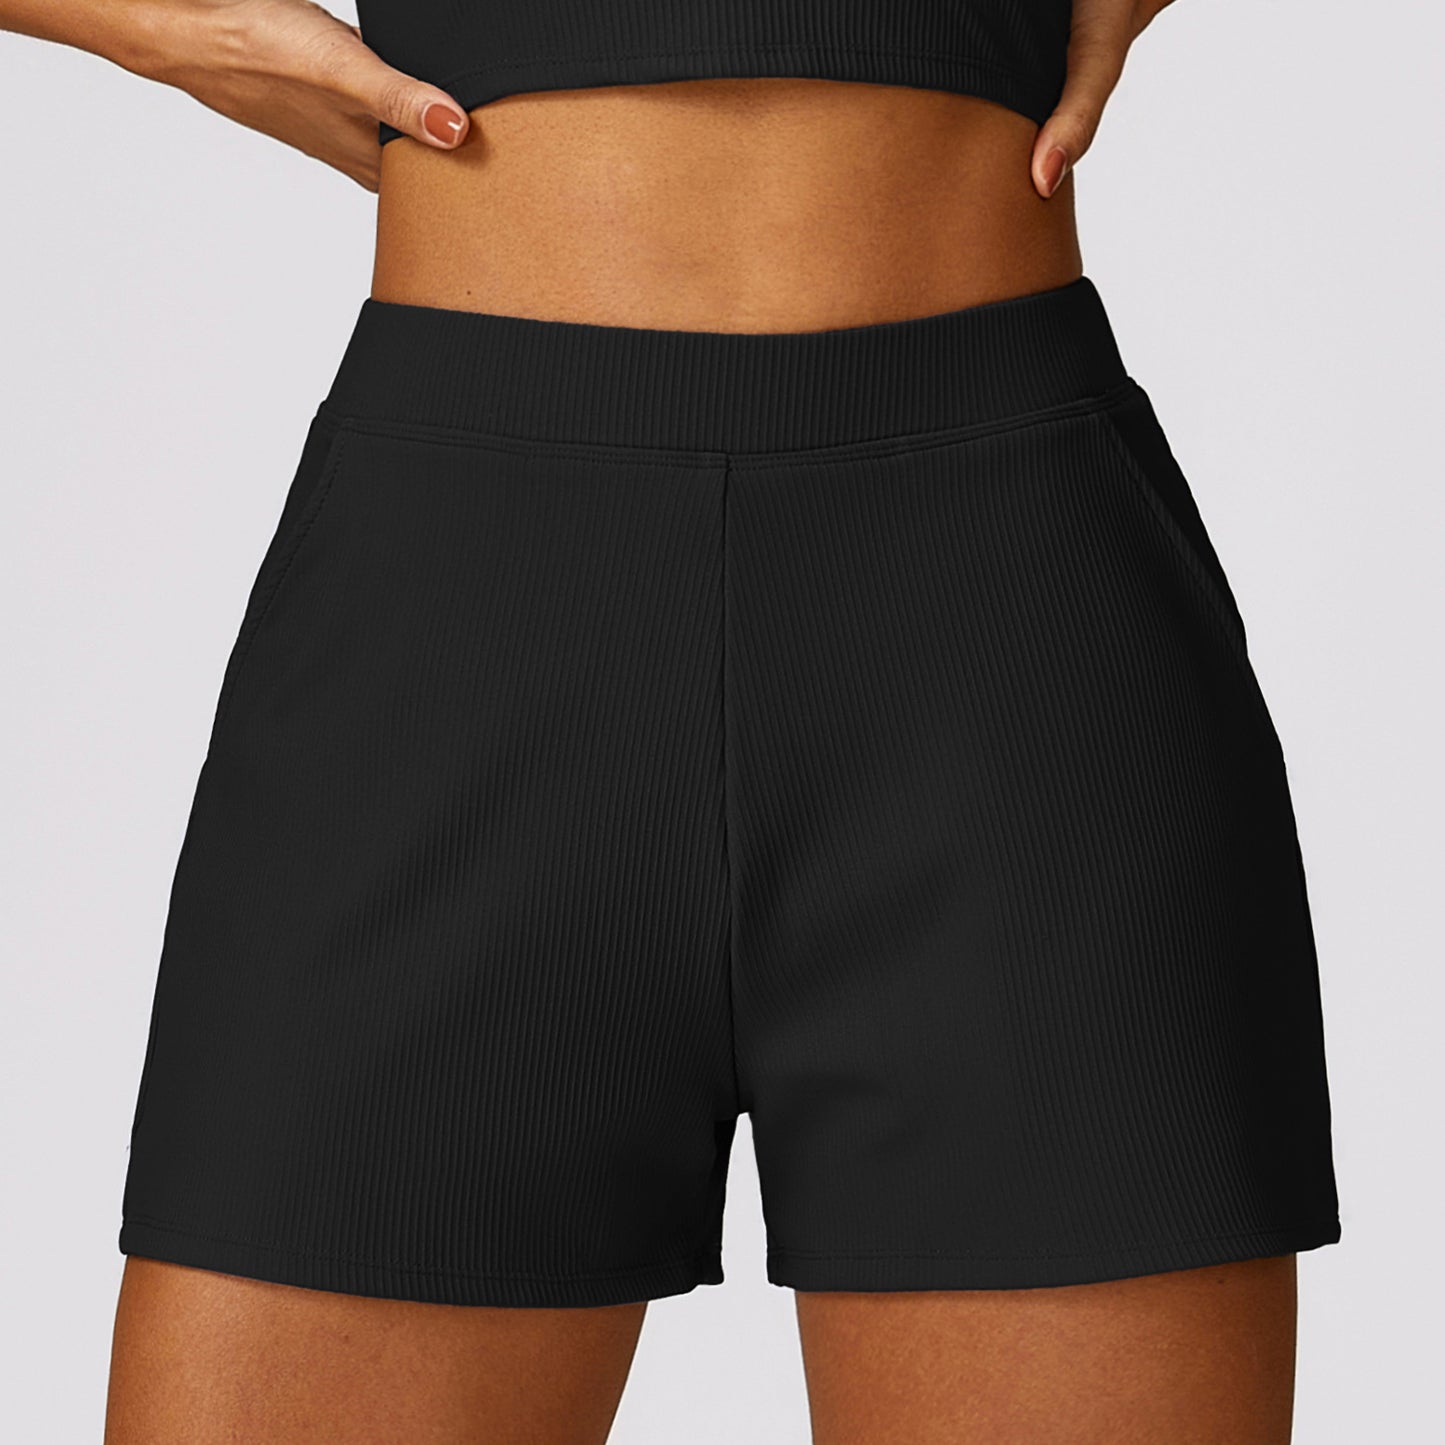 Loose Leisure Sports Shorts Quick-drying Yoga Running Workout Shorts